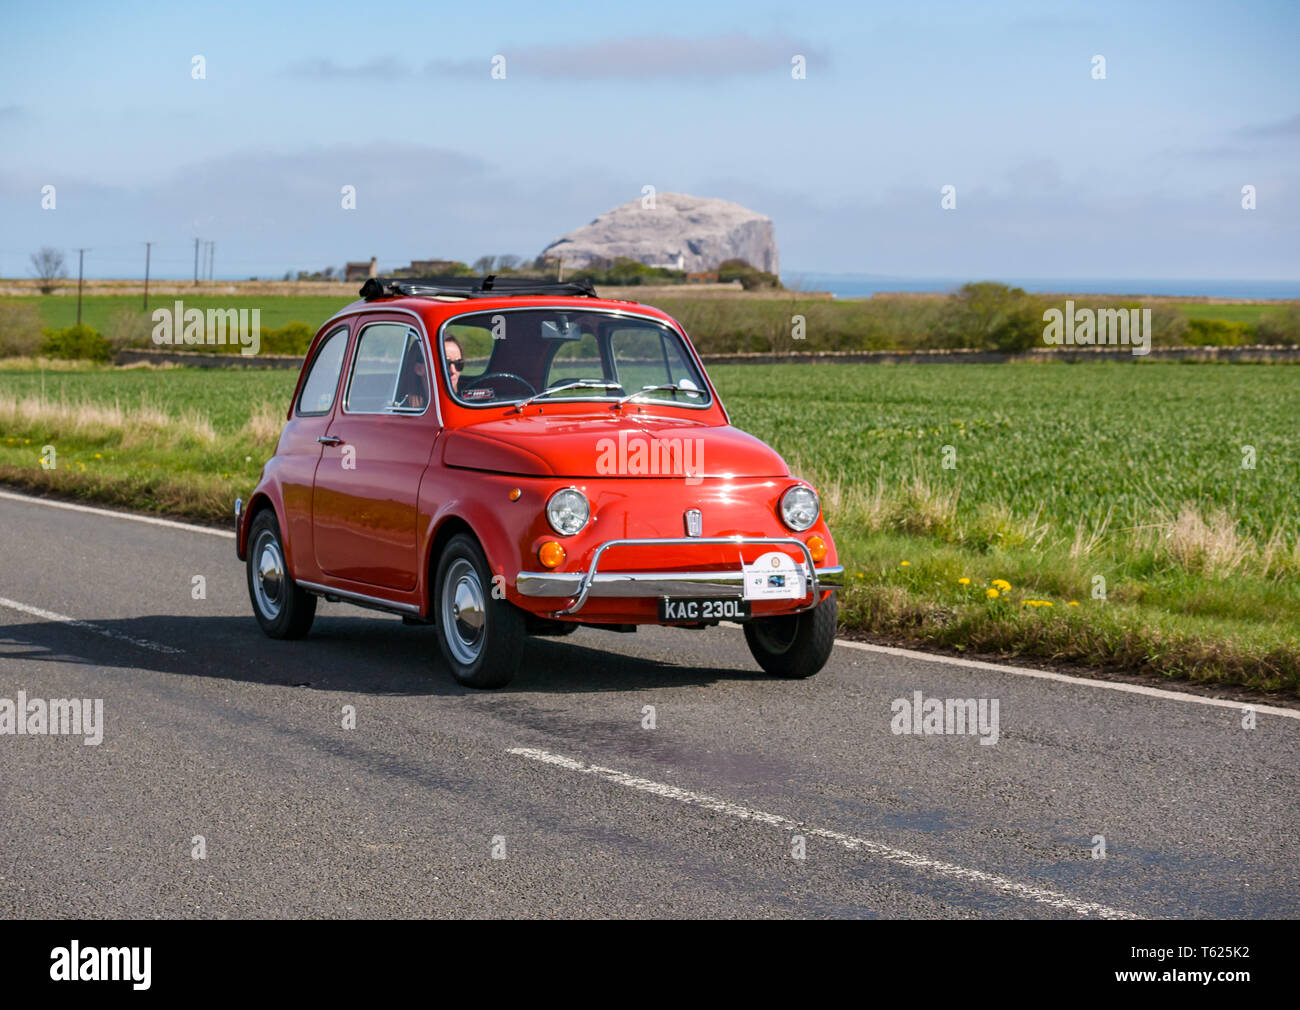 East Lothian, UK. 28 April 2019. Classic Car Tour: North Berwick Rotary Club holds its 3rd rally with 65 classic cars entered. The car rally route is from East Lothian and back through the Scottish Borders, raising money for local charities. A vintage 1972 orange Fiat 500 with Bass Rock gannet colony on a Scottish country road Stock Photo